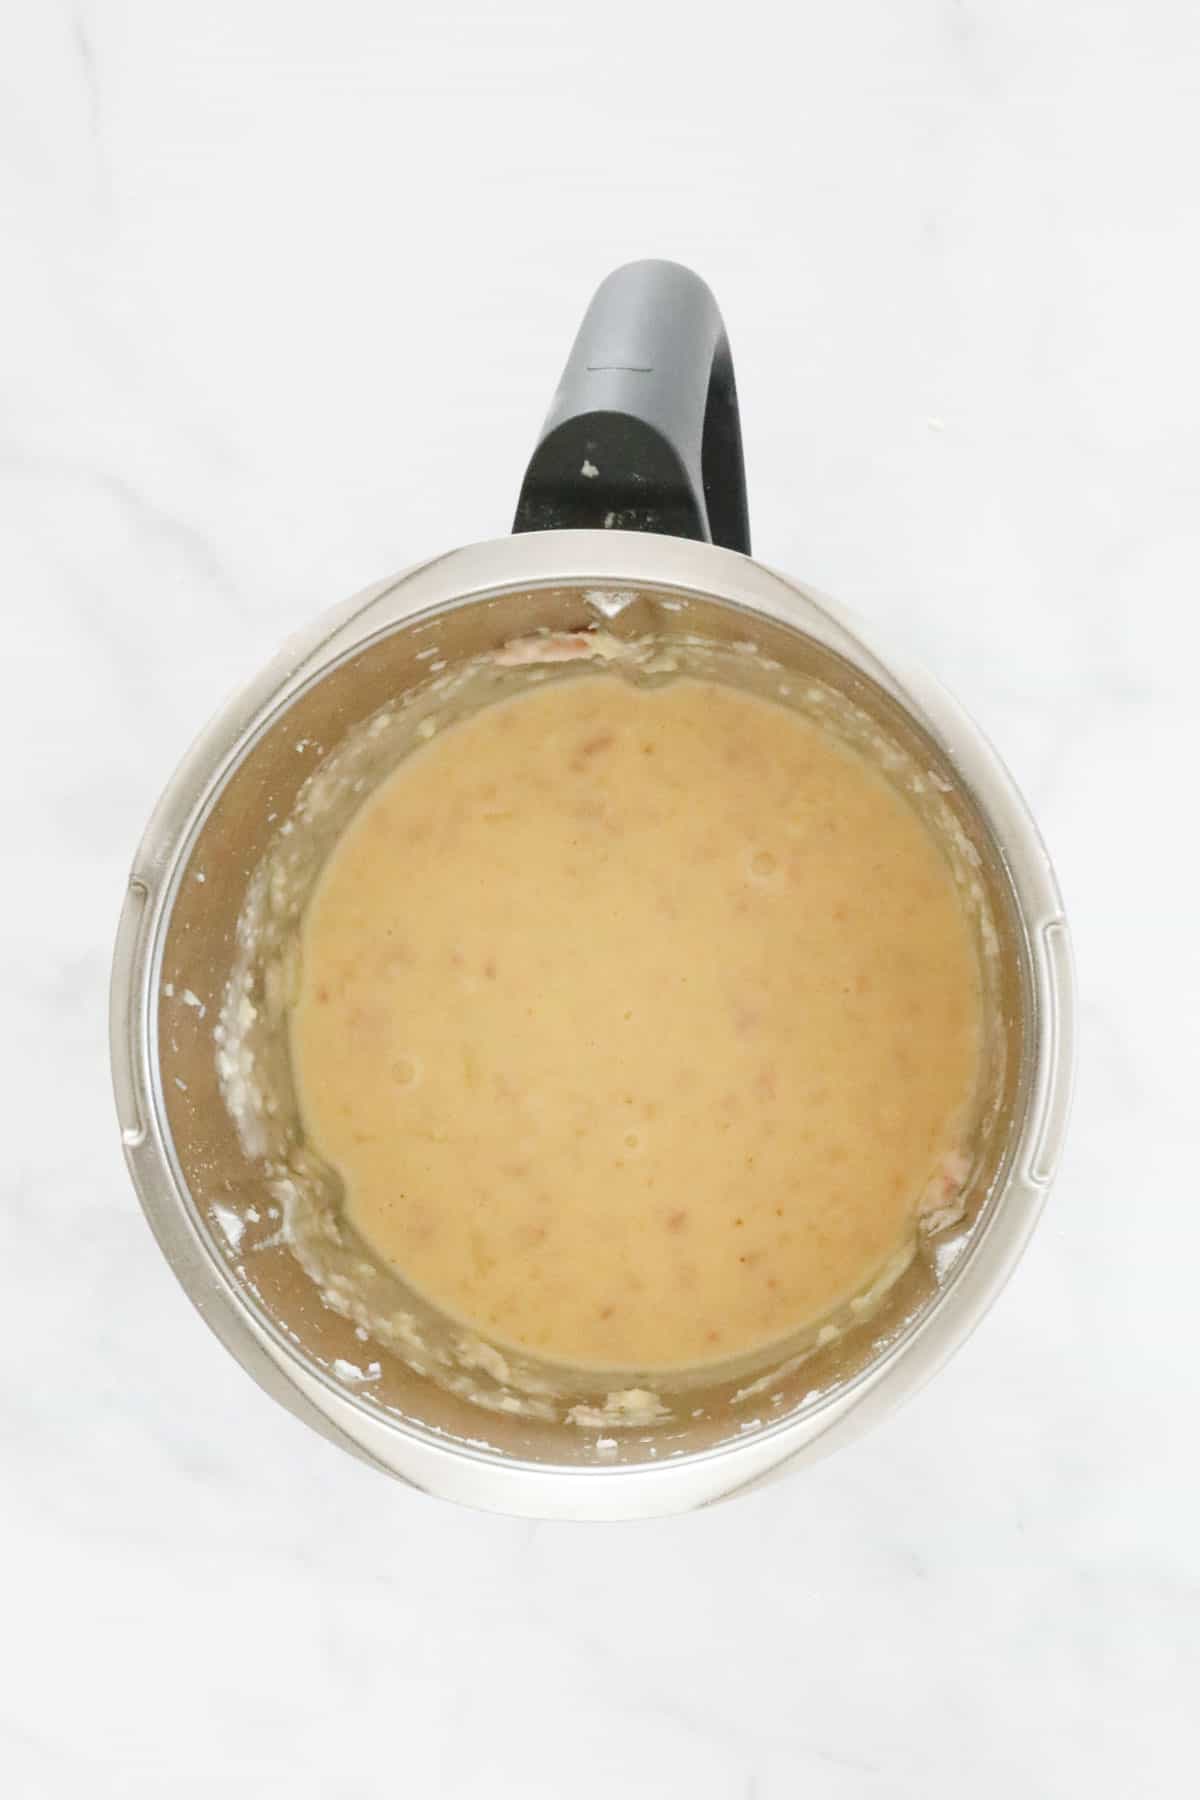 Egg mixture in a stainless steel bowl.